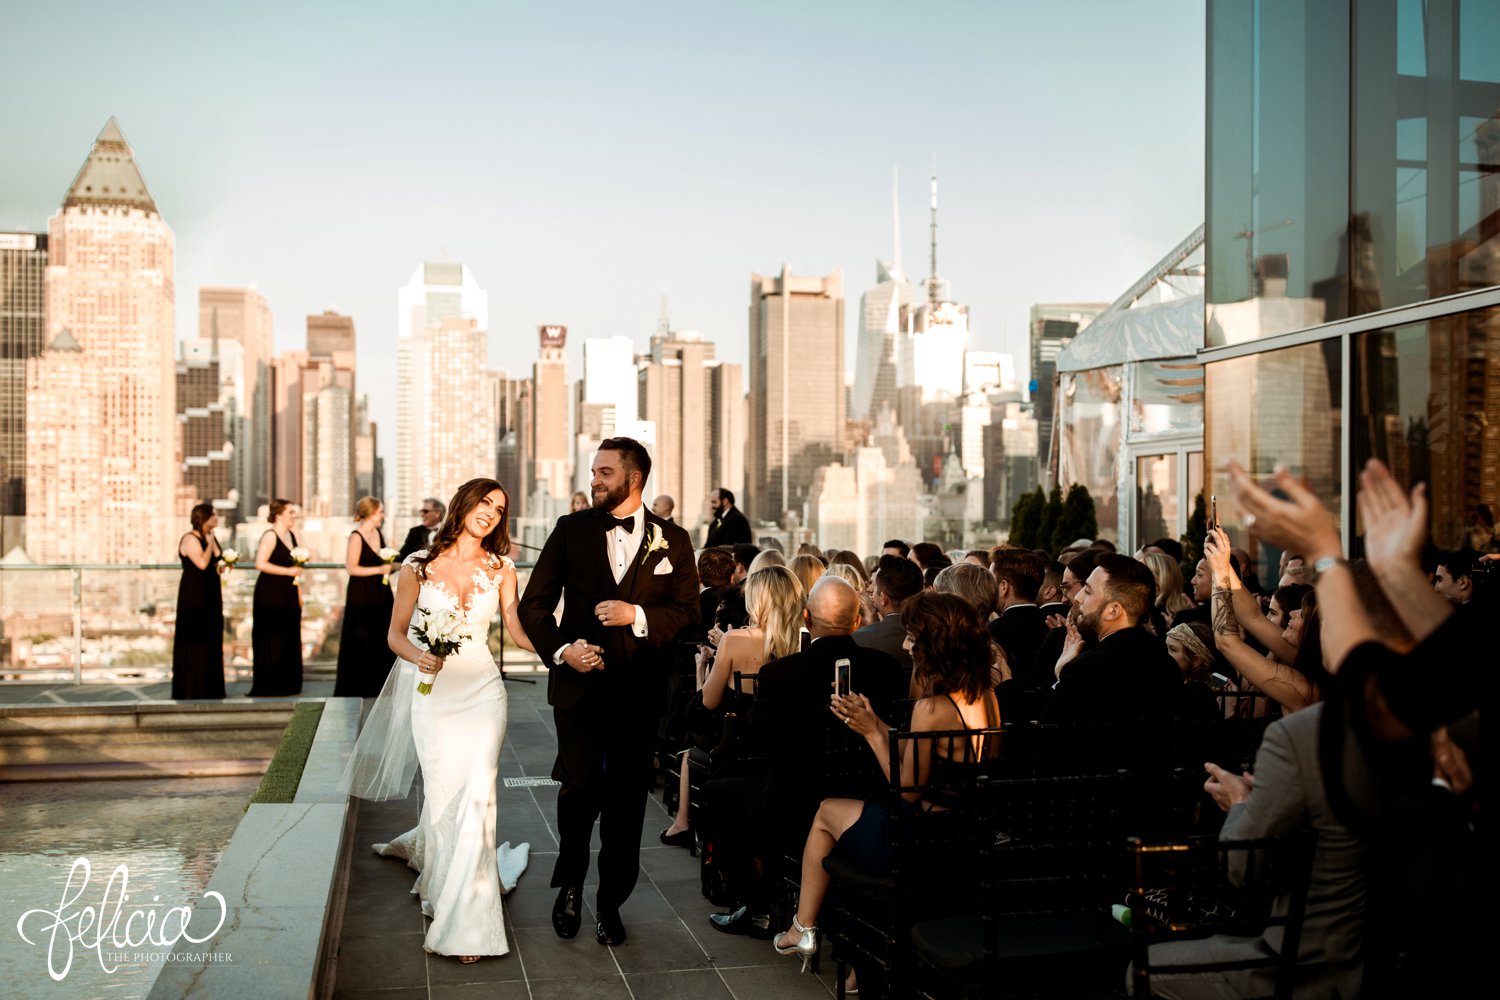 images by feliciathephotographer.com | destination wedding photographer | new york city | ceremony | rooftop | skyline | urban | romantic | classic | emotional | bride and groom | long white gown | lace details | open back | black tuxedo | mens warehouse | pronovais | nordstrom | walking back down the aisle | mr and mrs | 